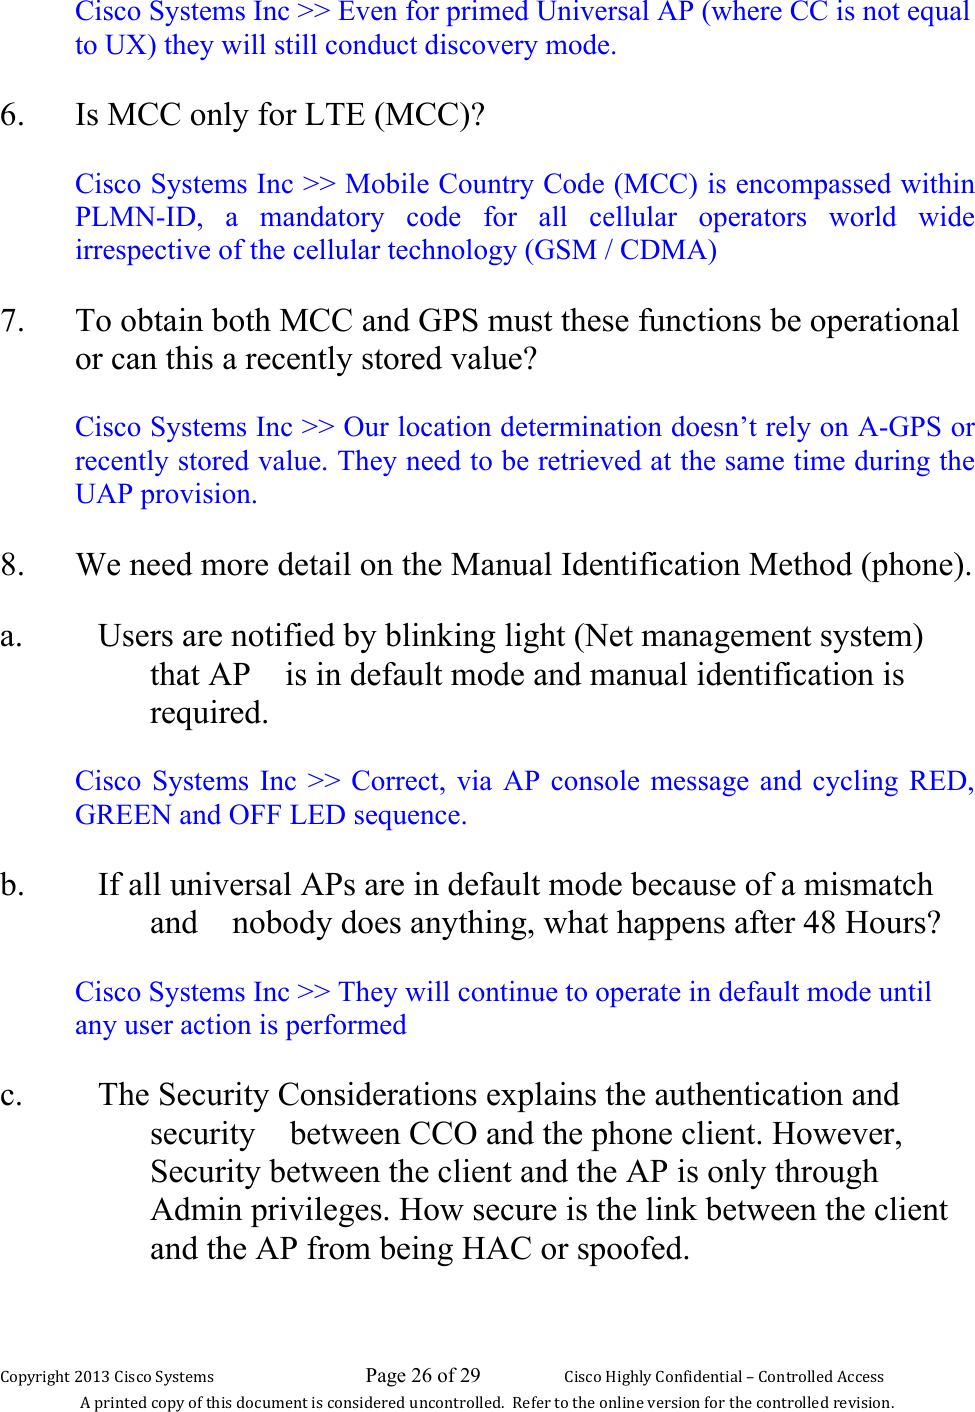 Copyright 2013 Cisco Systems                             Page 26 of 29                     Cisco Highly Confidential – Controlled Access A printed copy of this document is considered uncontrolled.  Refer to the online version for the controlled revision. Cisco Systems Inc &gt;&gt; Even for primed Universal AP (where CC is not equal to UX) they will still conduct discovery mode.  6. Is MCC only for LTE (MCC)?  Cisco Systems Inc &gt;&gt; Mobile Country Code (MCC) is encompassed within PLMN-ID, a mandatory code for all cellular operators world wide irrespective of the cellular technology (GSM / CDMA) 7. To obtain both MCC and GPS must these functions be operational or can this a recently stored value?  Cisco Systems Inc &gt;&gt; Our location determination doesn’t rely on A-GPS or recently stored value. They need to be retrieved at the same time during the UAP provision. 8. We need more detail on the Manual Identification Method (phone).  a. Users are notified by blinking light (Net management system) that AP is in default mode and manual identification is required.  Cisco Systems Inc &gt;&gt; Correct, via AP console message and cycling RED, GREEN and OFF LED sequence. b. If all universal APs are in default mode because of a mismatch and nobody does anything, what happens after 48 Hours?  Cisco Systems Inc &gt;&gt; They will continue to operate in default mode until any user action is performed c. The Security Considerations explains the authentication and security between CCO and the phone client. However, Security between the client and the AP is only through Admin privileges. How secure is the link between the client and the AP from being HAC or spoofed.   